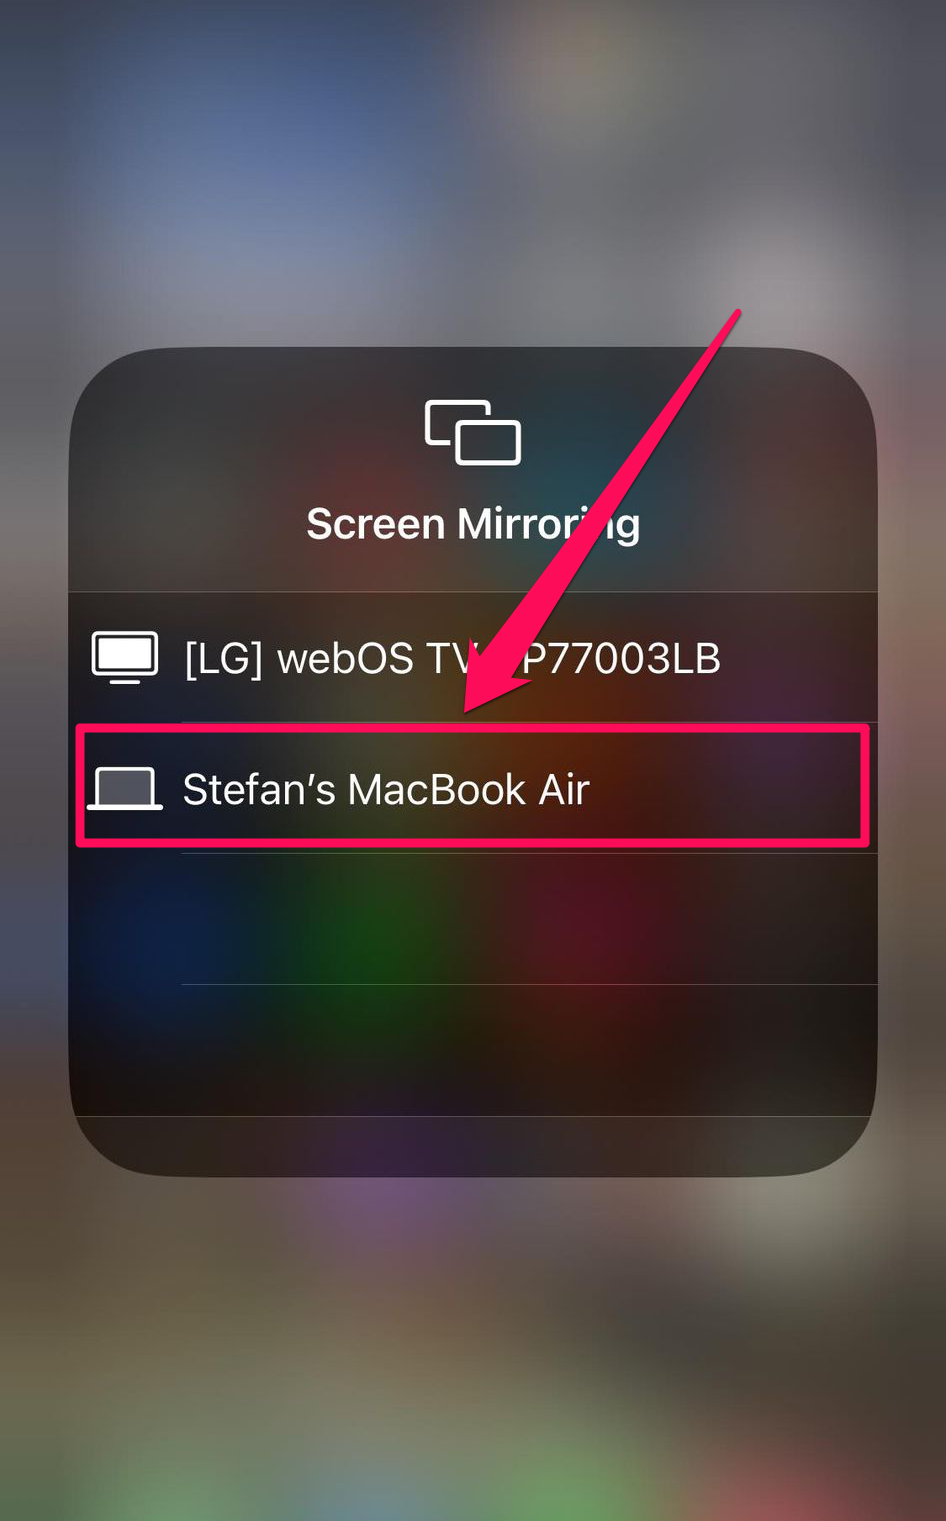 Choose your Mac in the Screen Mirroring option on iPhone